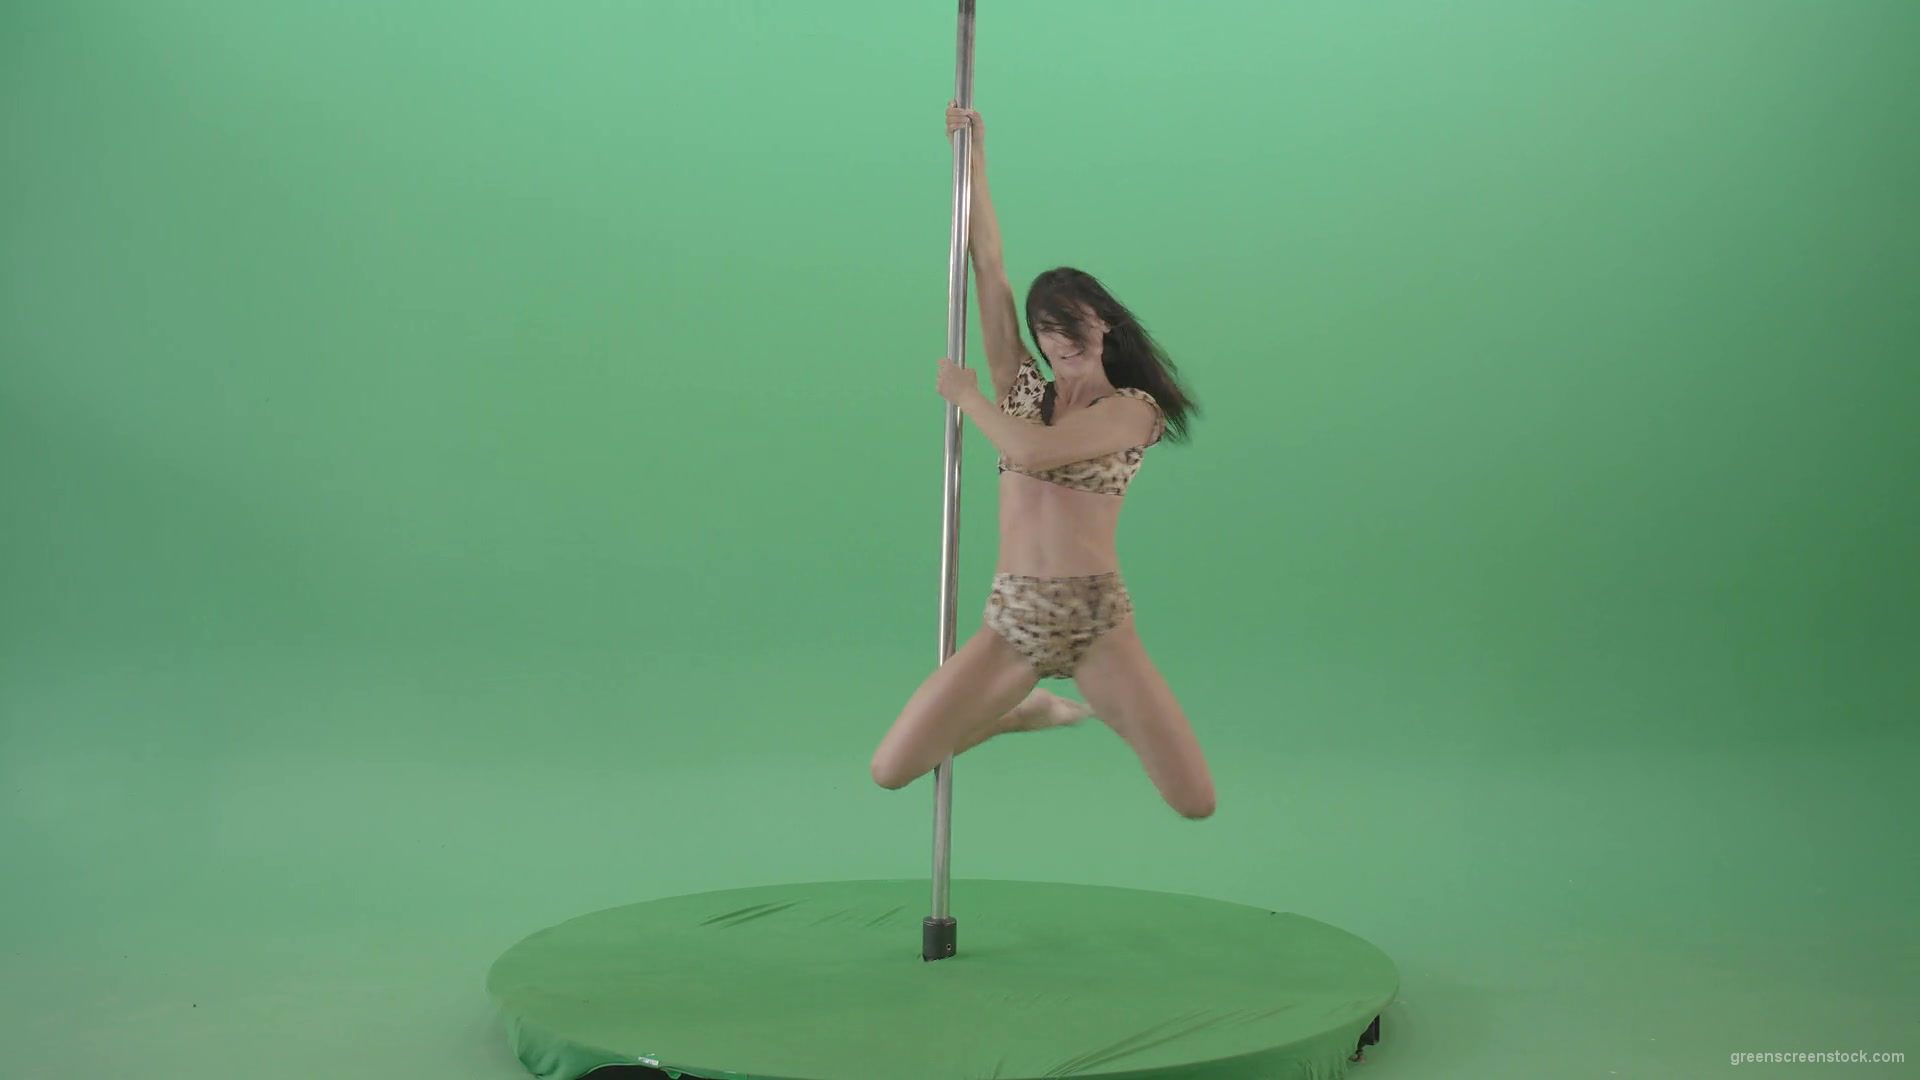 Glamor-girl-in-leopard-underwear-dancing-on-pilon-Pole-dance-and-spinning-isolated-on-Green-Screen-Video-Footage-1920_006 Green Screen Stock